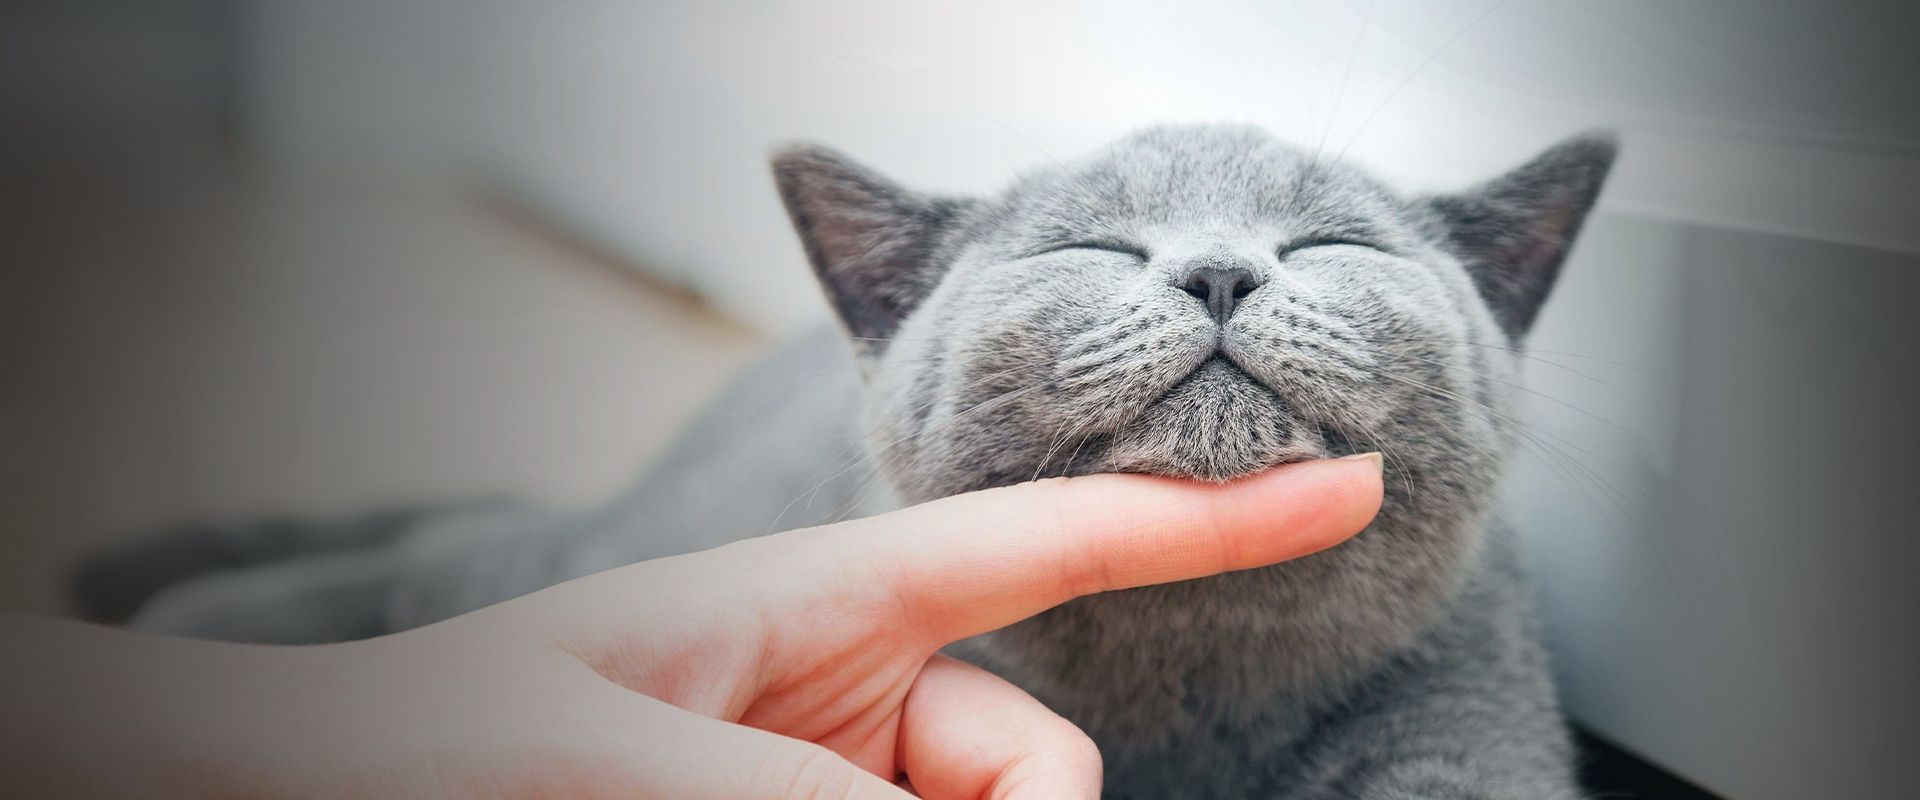 gray cat being petted